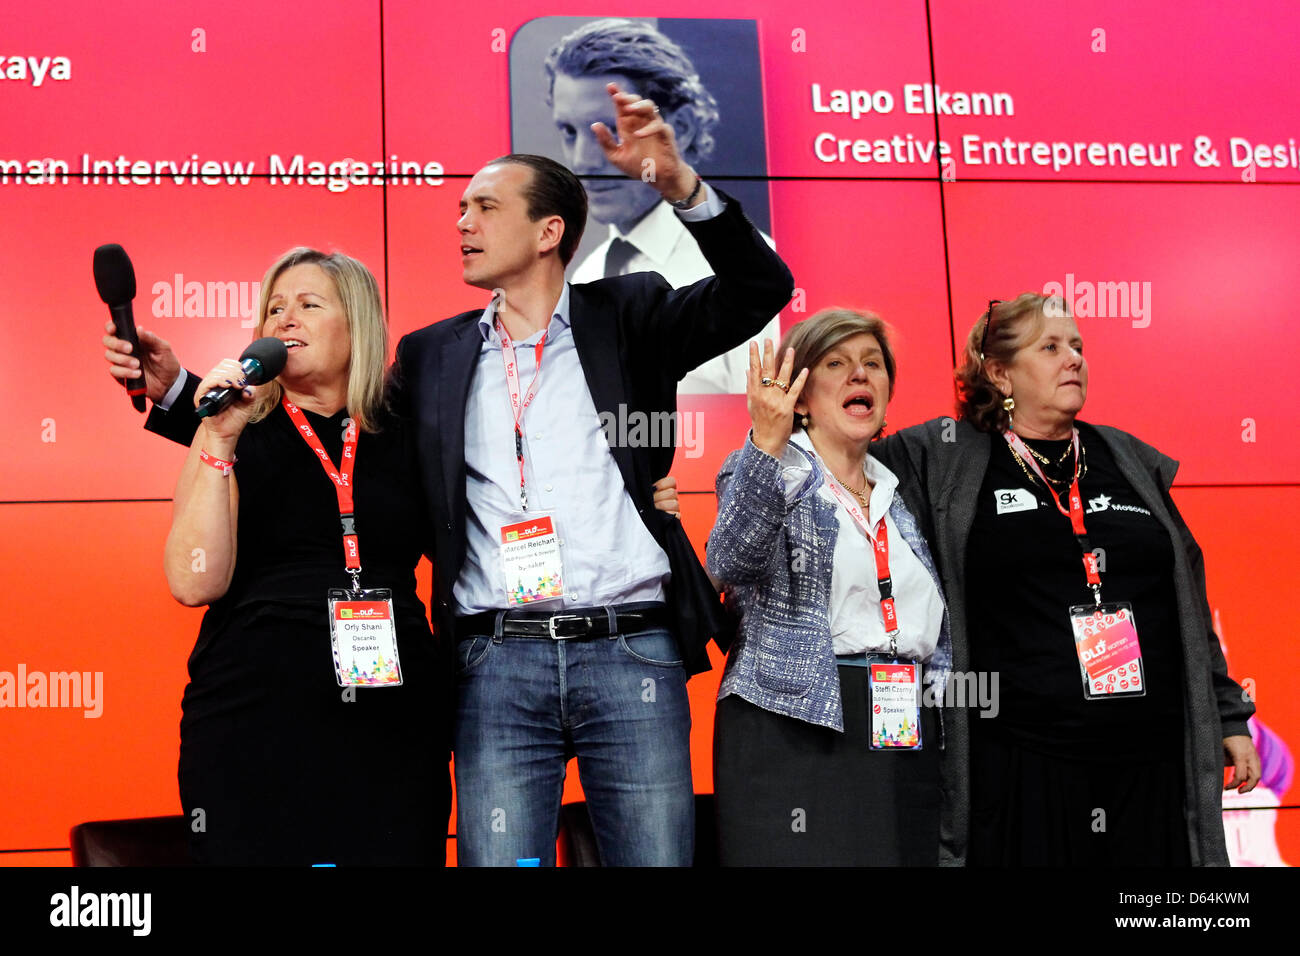 Marcel Reichart, Managing Director and Co-Founder of DLD, Steffi Czerny (2-R), Managing Director at Hubert Burda Media R&D, Orly Shani (L) and Ruthi Koren of OSCAR4B (R) react during the closing ceremony of the DLD Conference 2012 in Moscow, Russia, 29 May 2012. DLD Moscow wants to provide an interdisciplinary platform for international business leaders and experts from media, soci Stock Photo